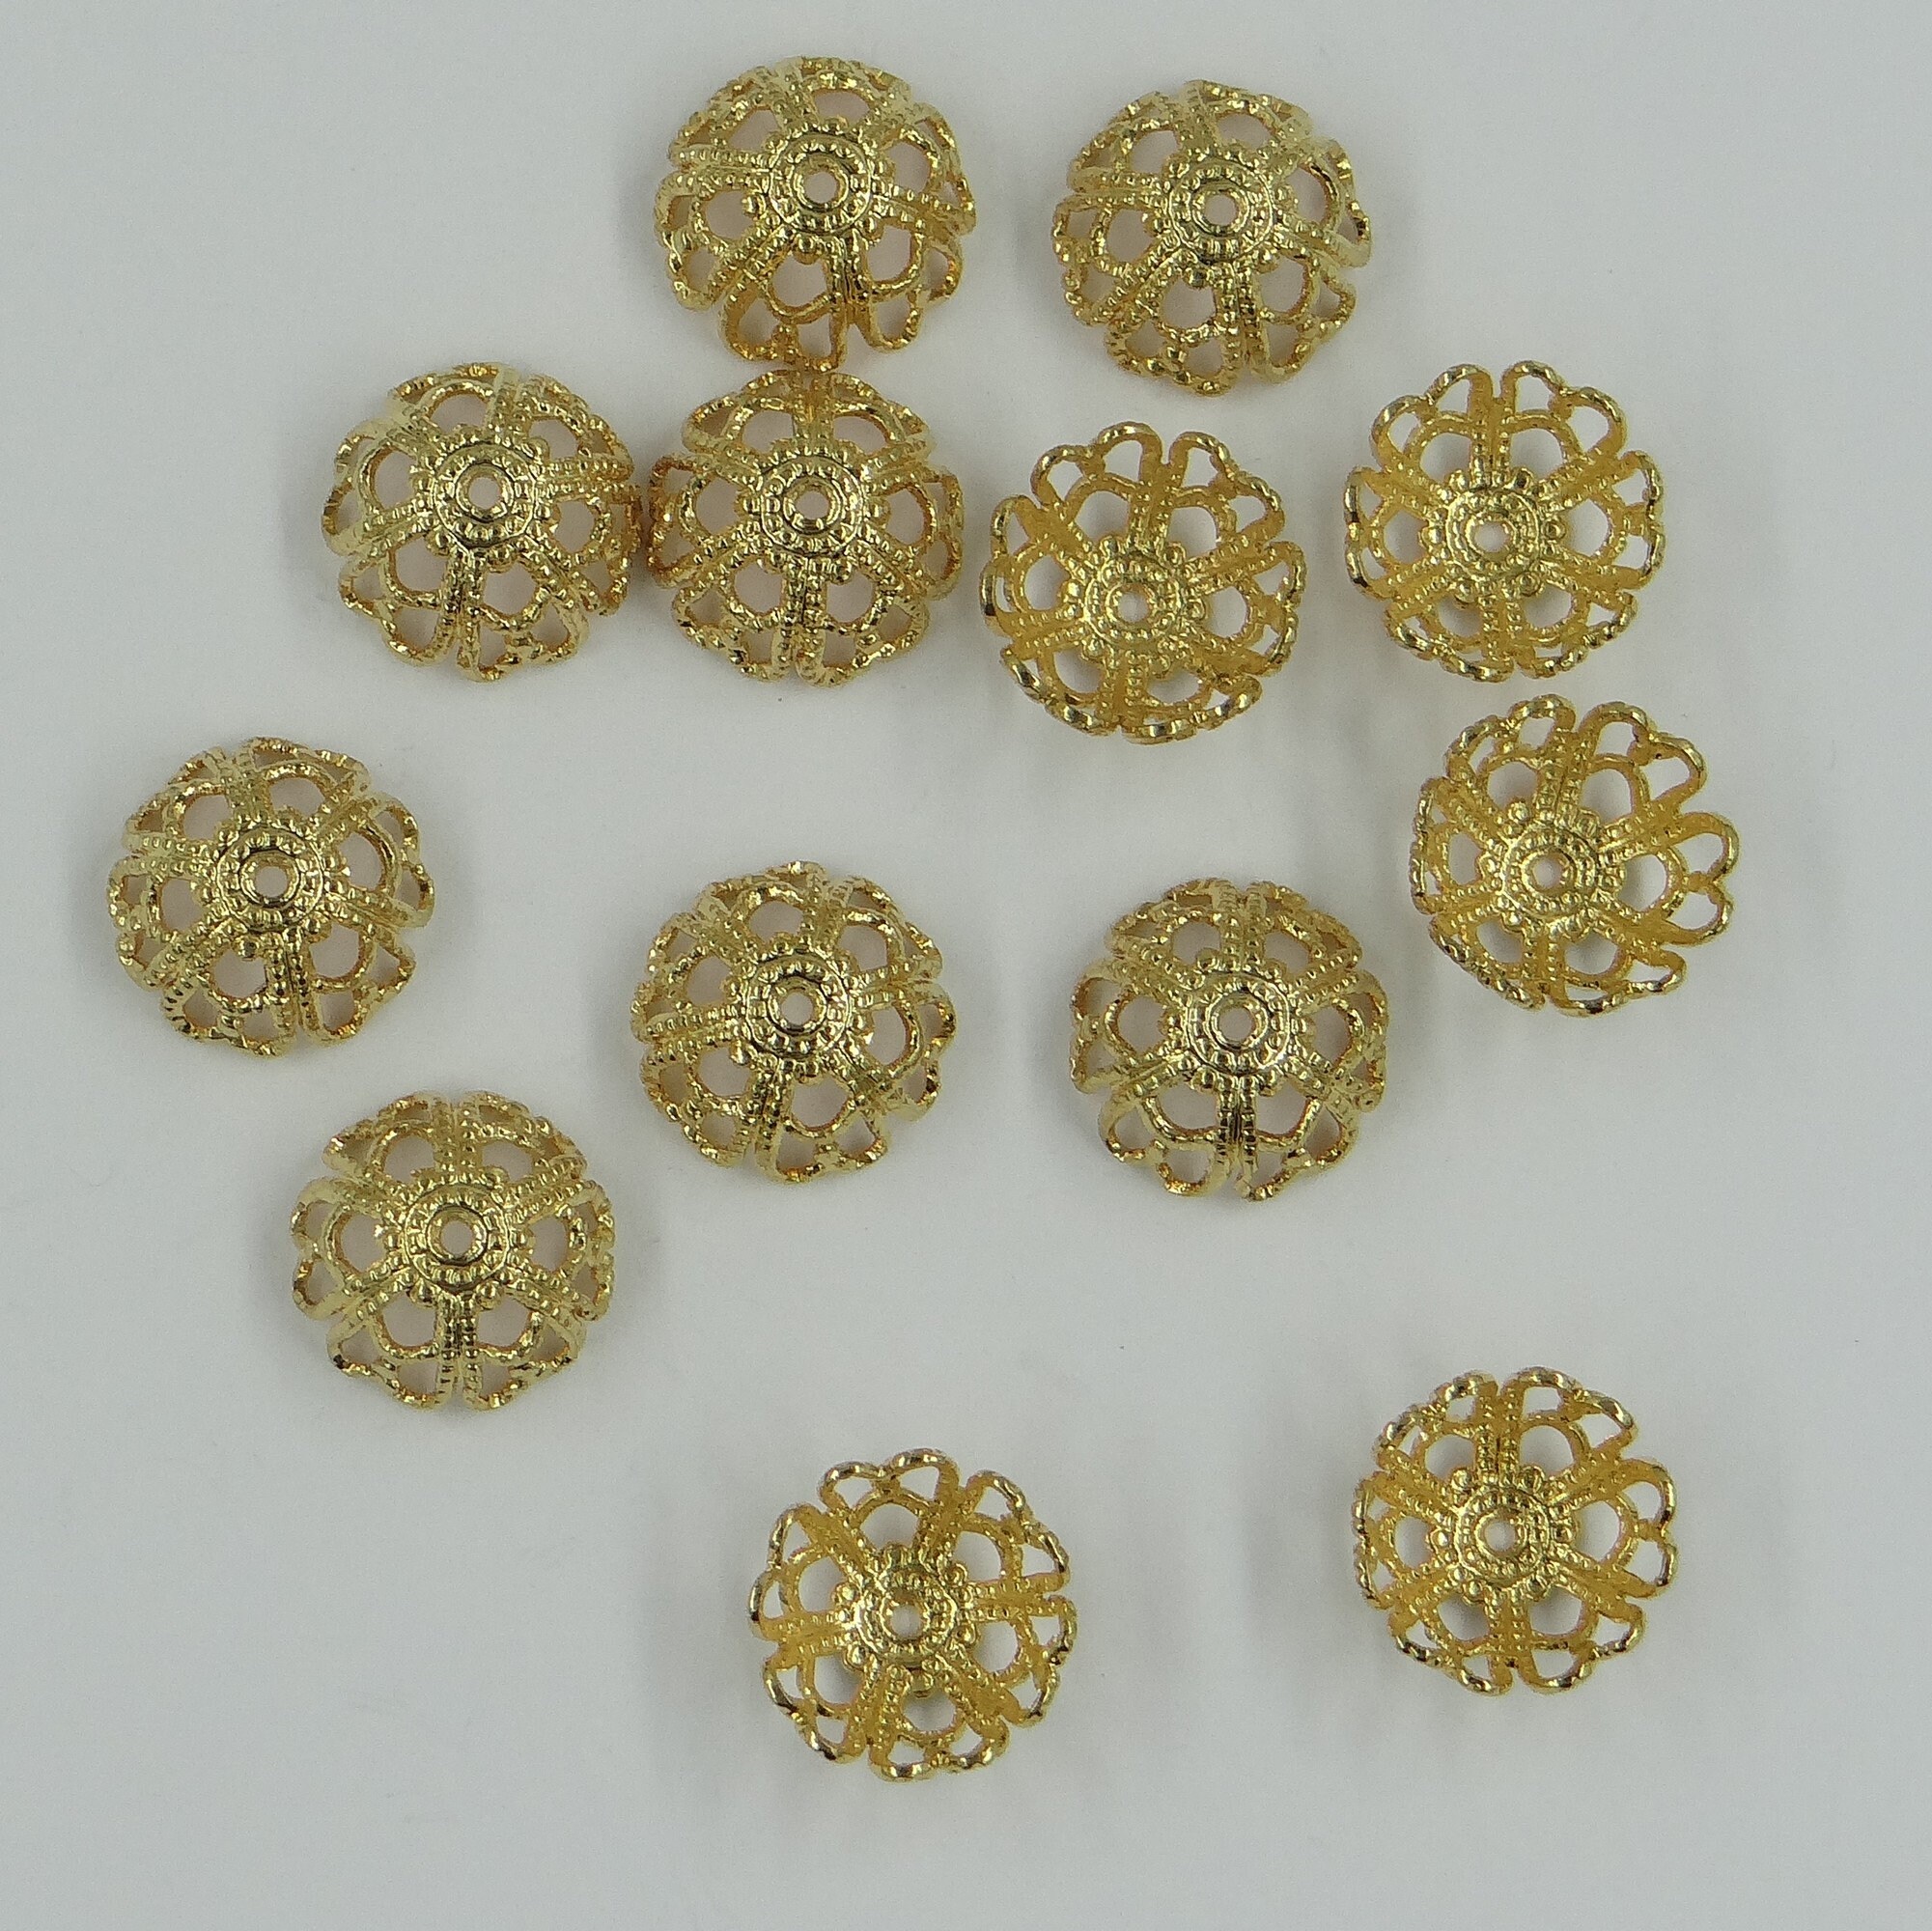 Tiny Golden Bead Caps, Caps for Jewelry Making, Flower Shaped 6mm Bead Caps,  End Caps for Beads, 50 Pieces FD-37 